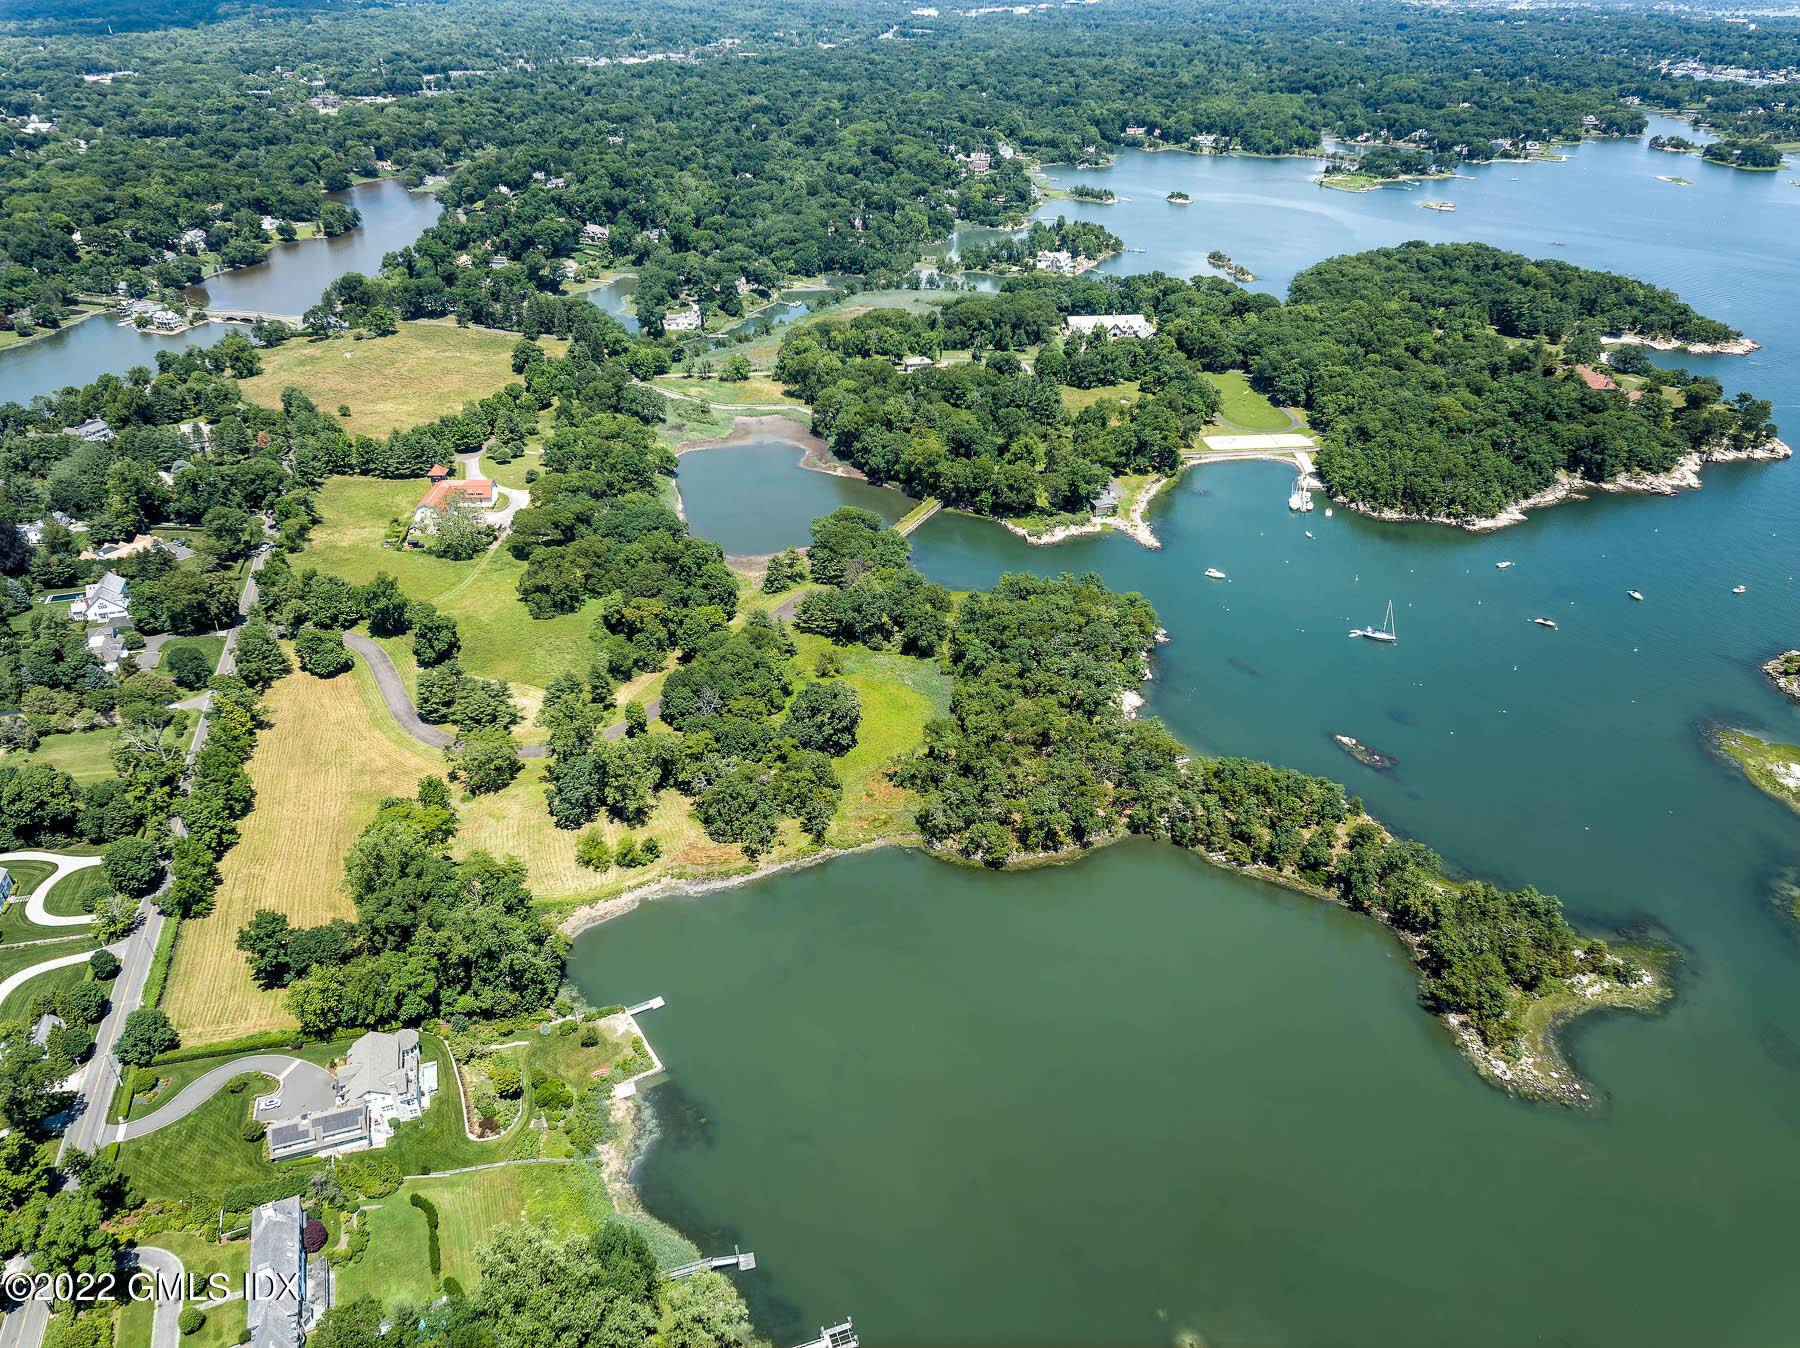 Darien's Ziegler Farm is now the Great Island Property Owners Association An approved sub division with 14 oversized building lots totaling 34.